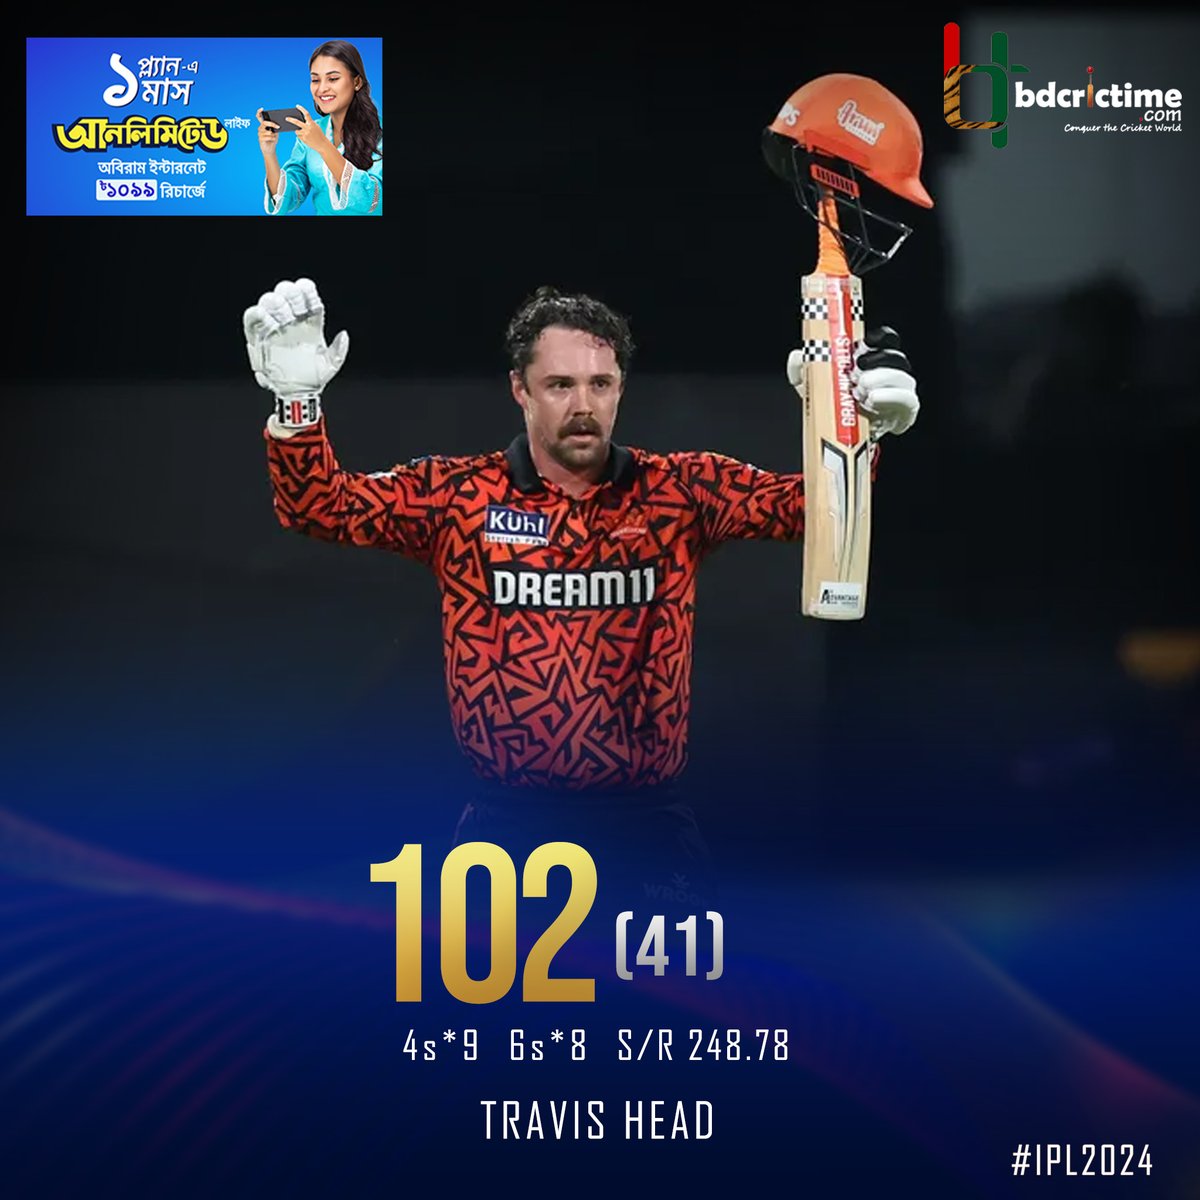 A 39-BALL 💯 BY TRAVIS HEAD

✅Fastest 💯by a SRH batter
✅ 4th fastest 💯in the history of IPL

Travis Head, What an unbelievable cricketer he is!

#IPL2024 #MyGP